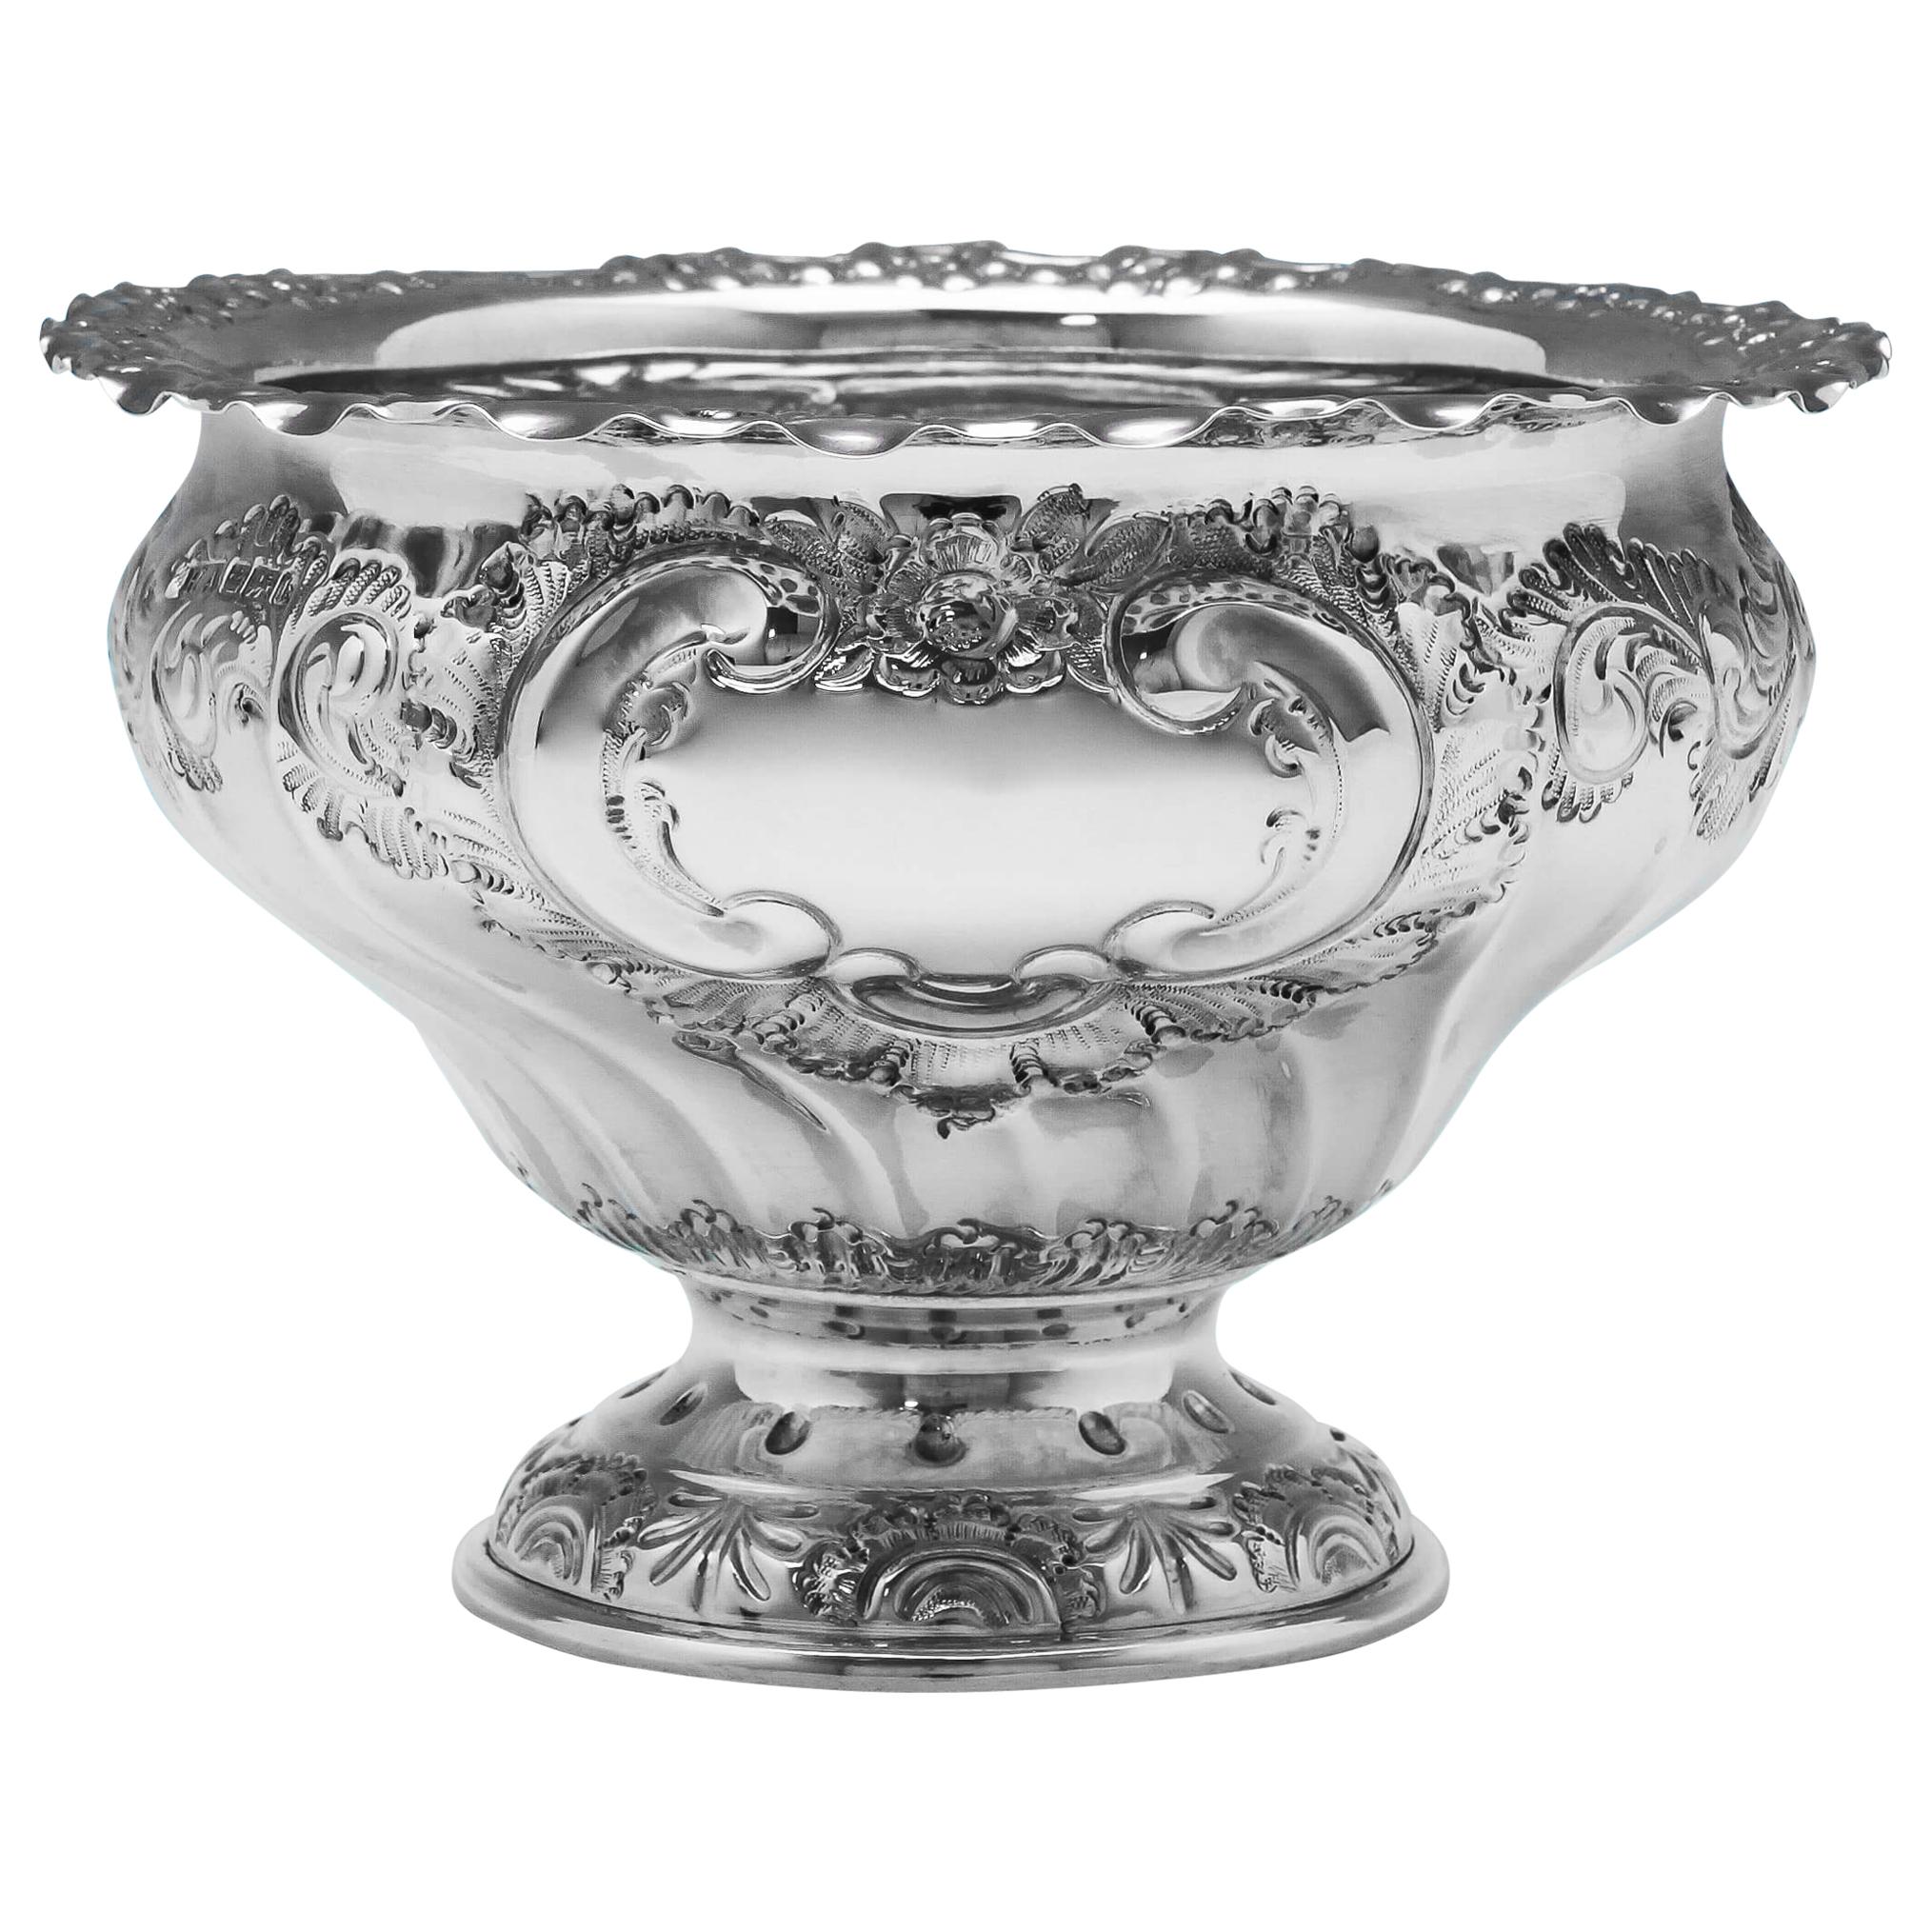 Ornate Chased Tulip Shaped Sterling Silver Bowl from 1902